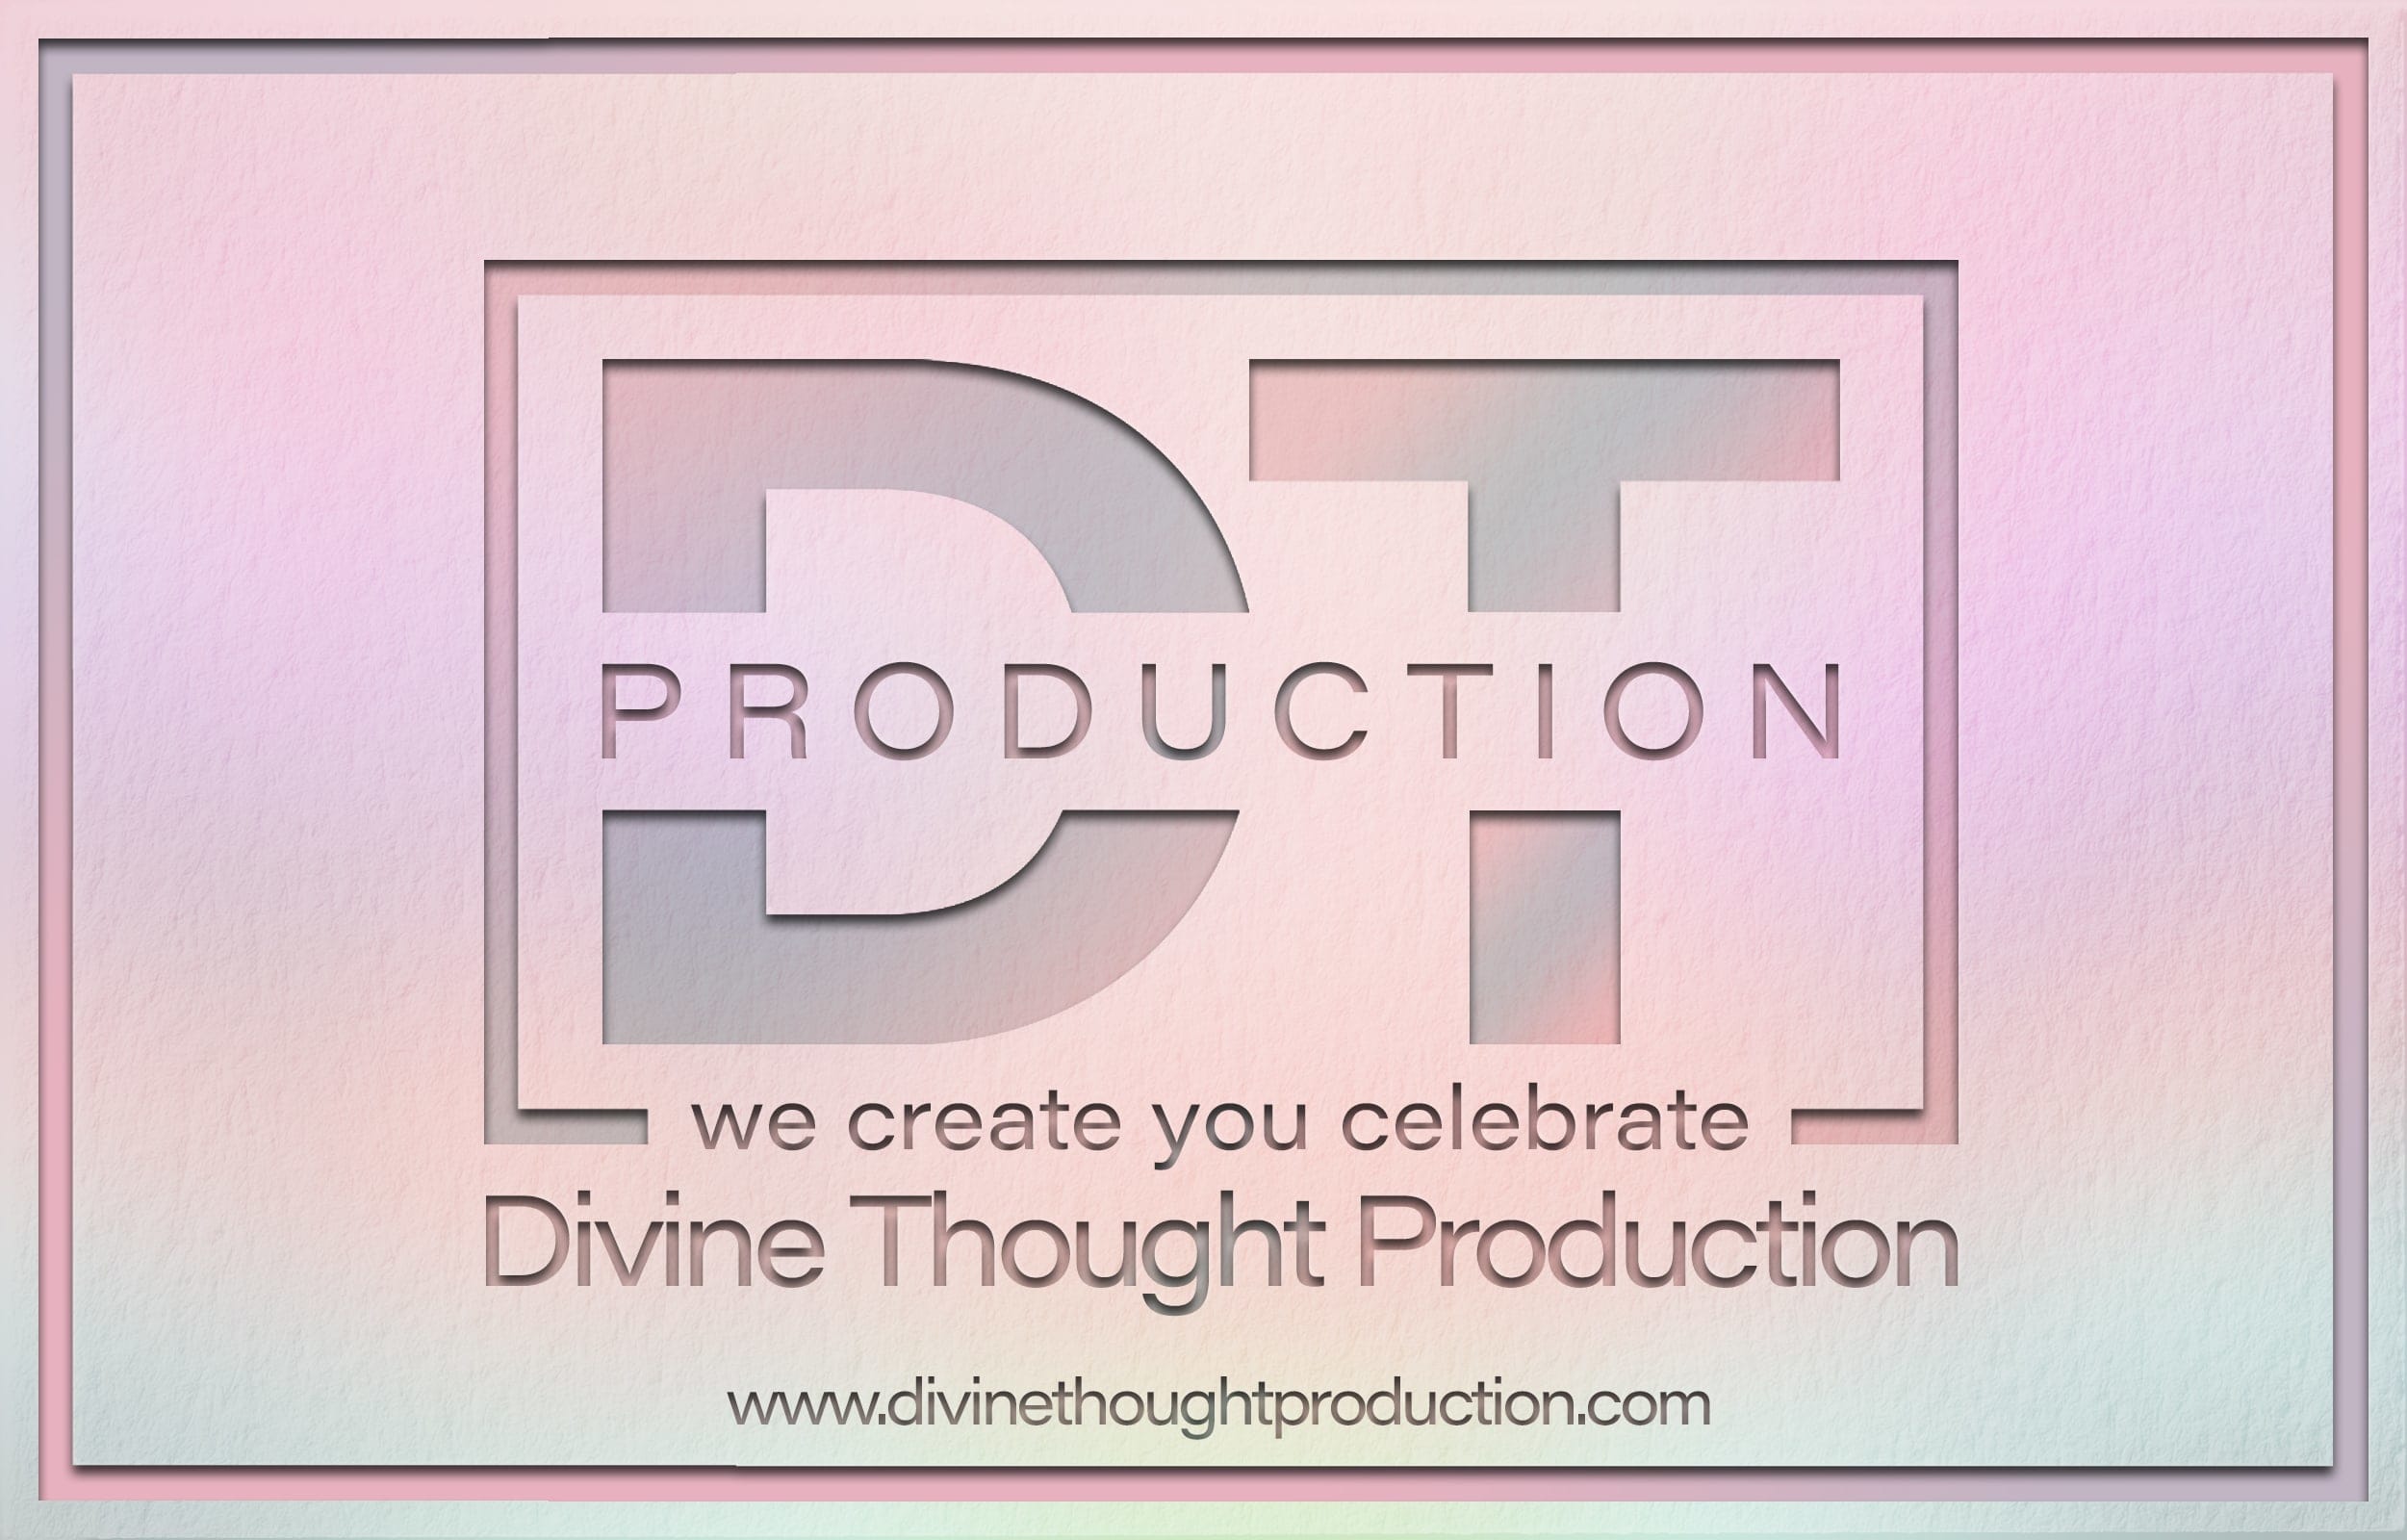 Divine Thought Production